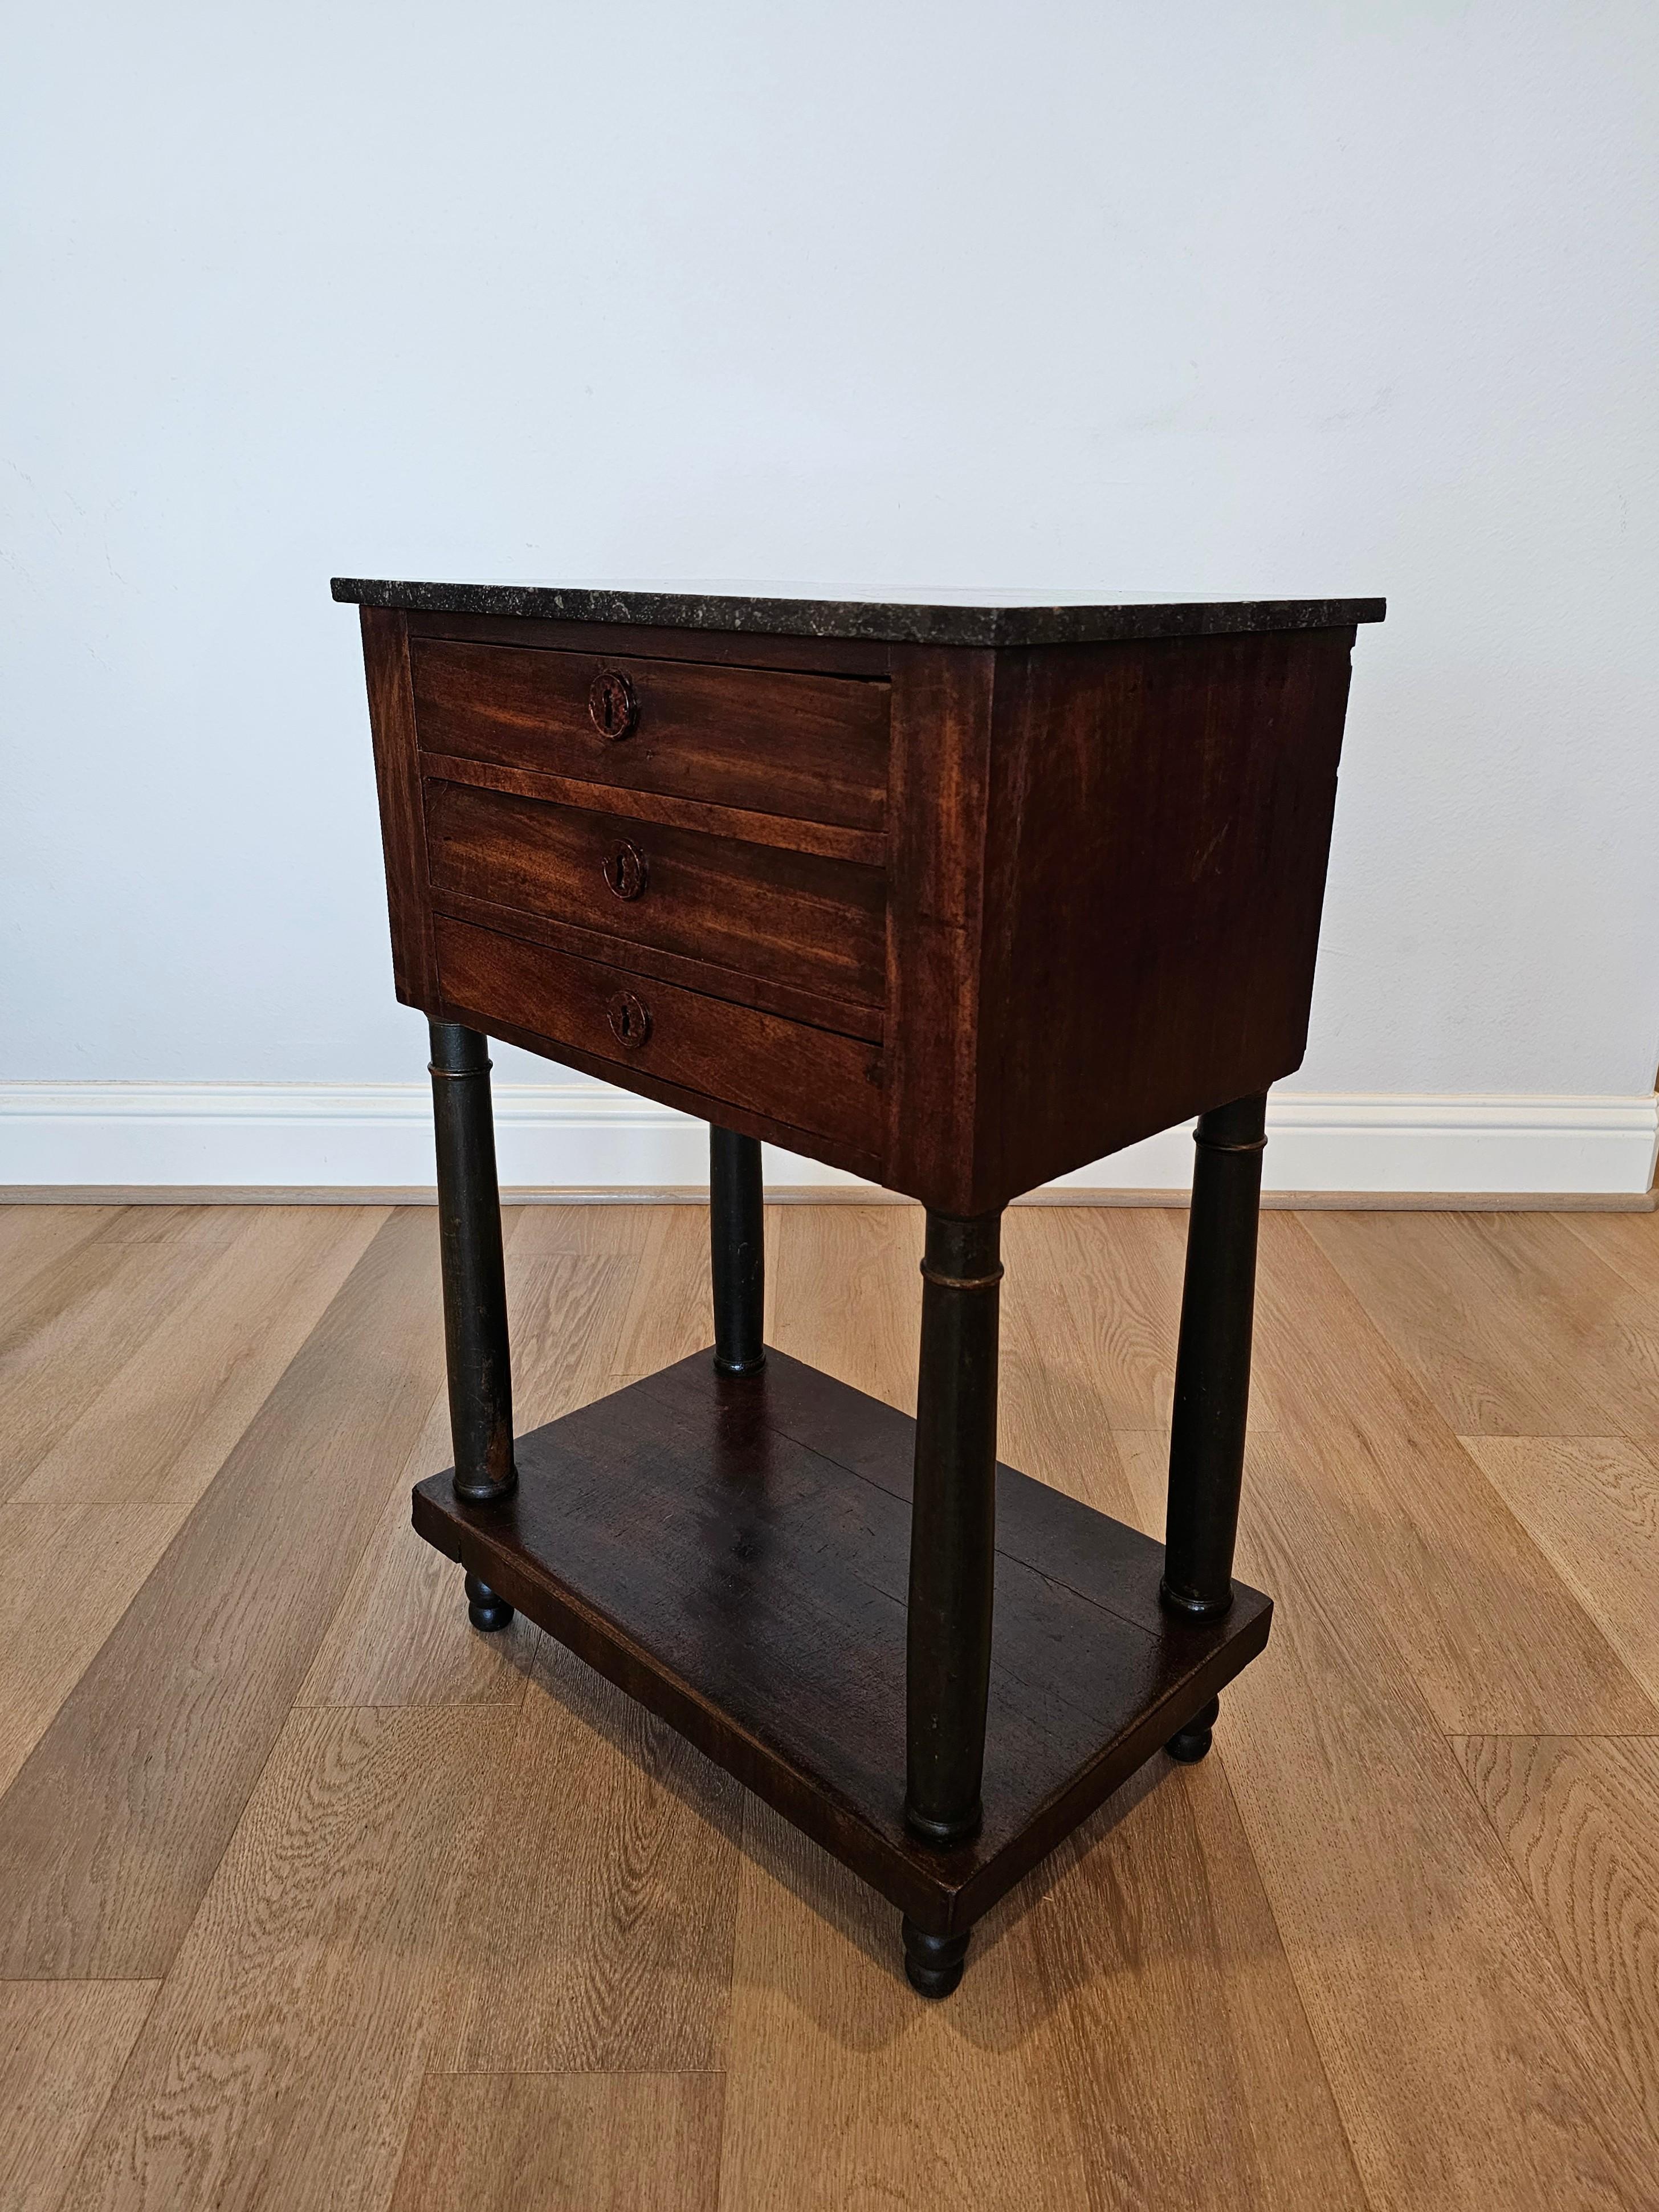 Belgian Black Marble Early 19th Century French Empire Period Mahogany Nightstand End Table For Sale